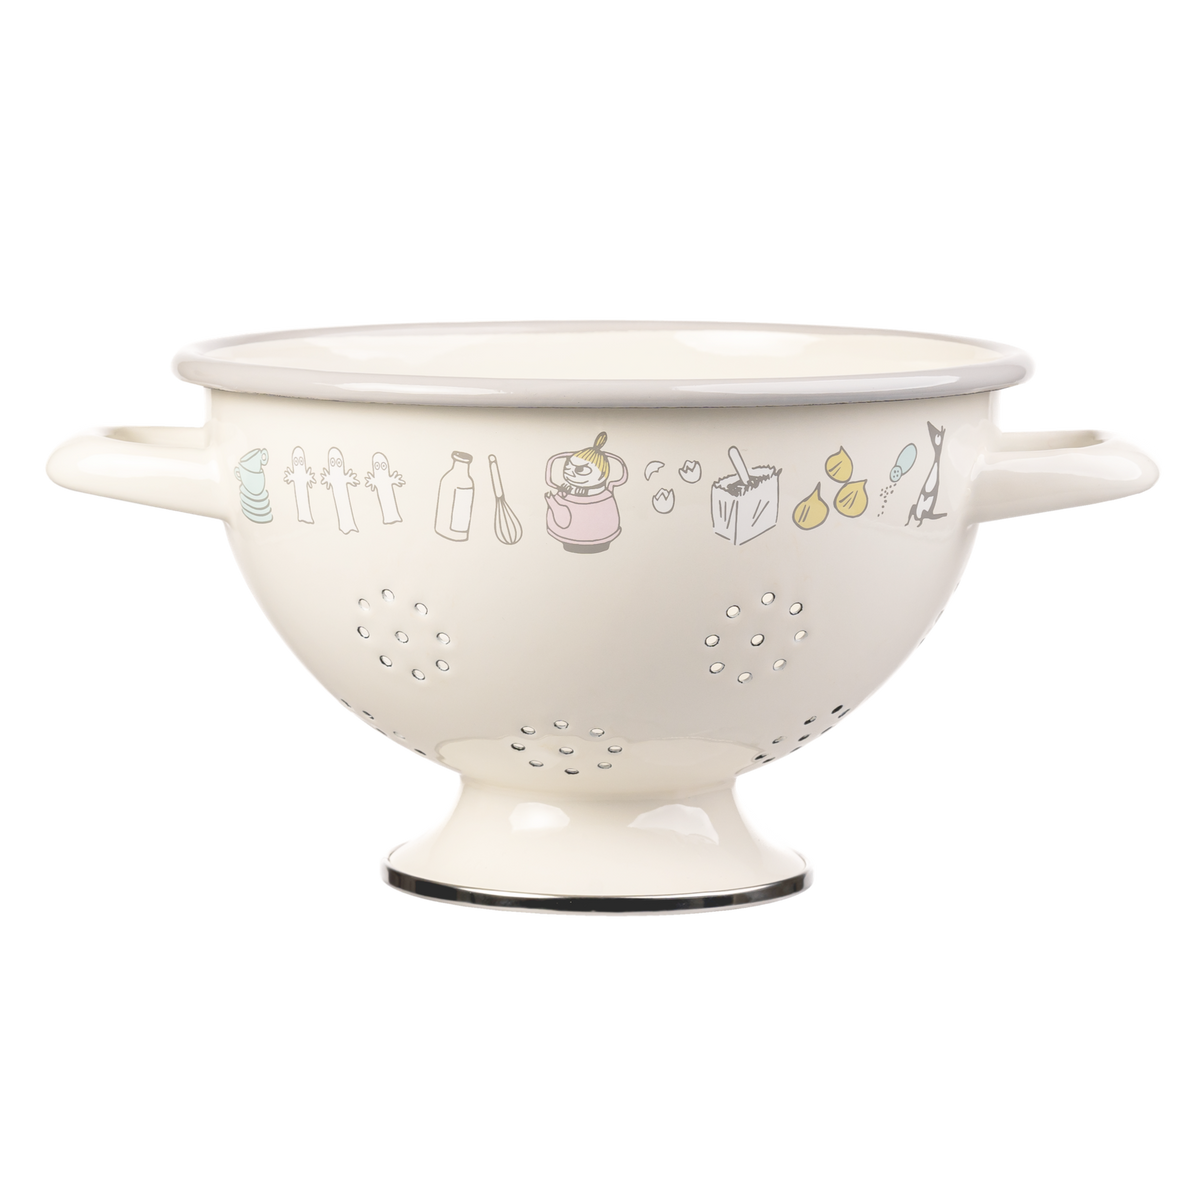 Moomin By Muurla Enamel Colander from the Bon Appétit Collection 